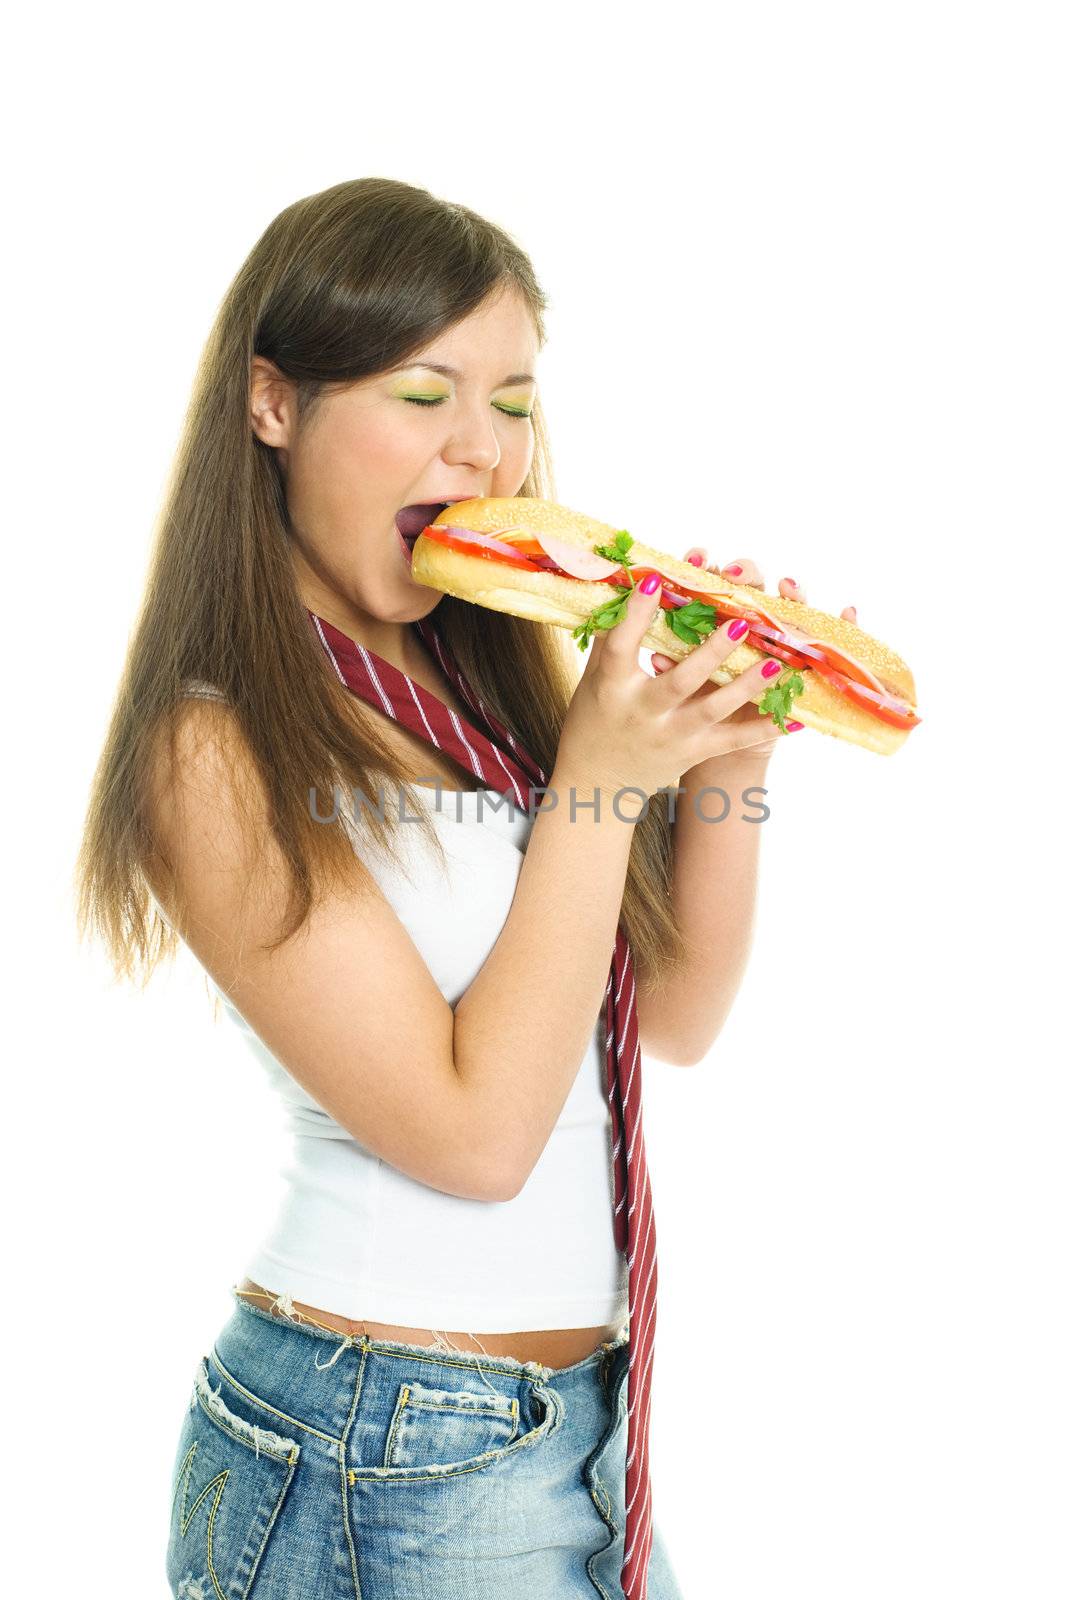 pretty young girl eating a huge hamburger, isolated against white background